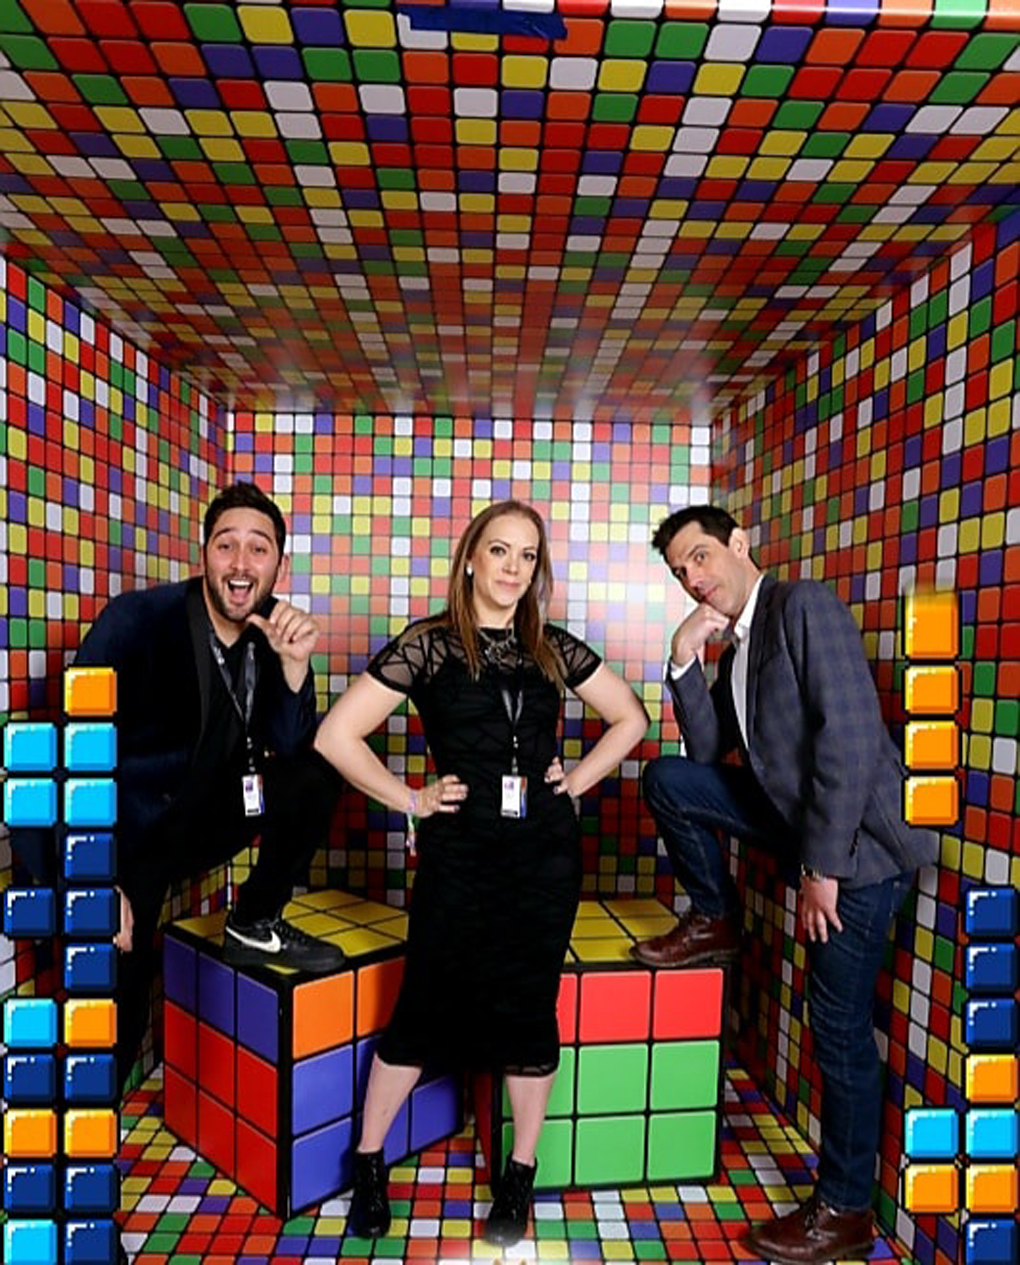 Three people standing in a room filled with rubik's cubes